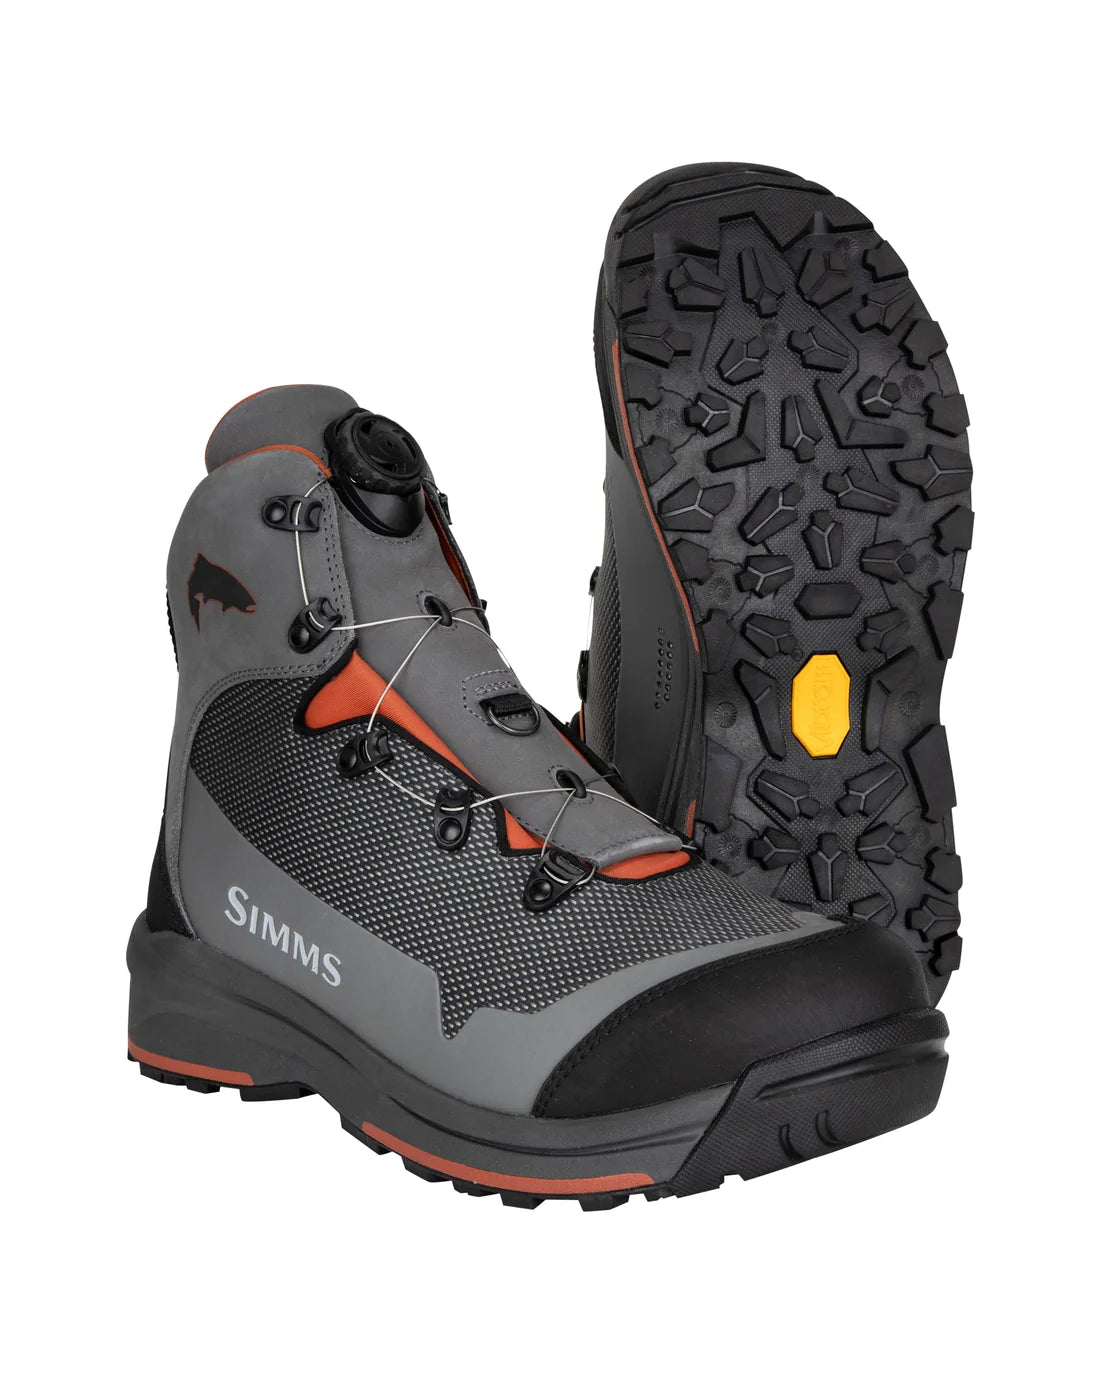 Simms Guide BOA Wading Boots - 9 / SLATE - Mansfield Hunting & Fishing - Products to prepare for Corona Virus